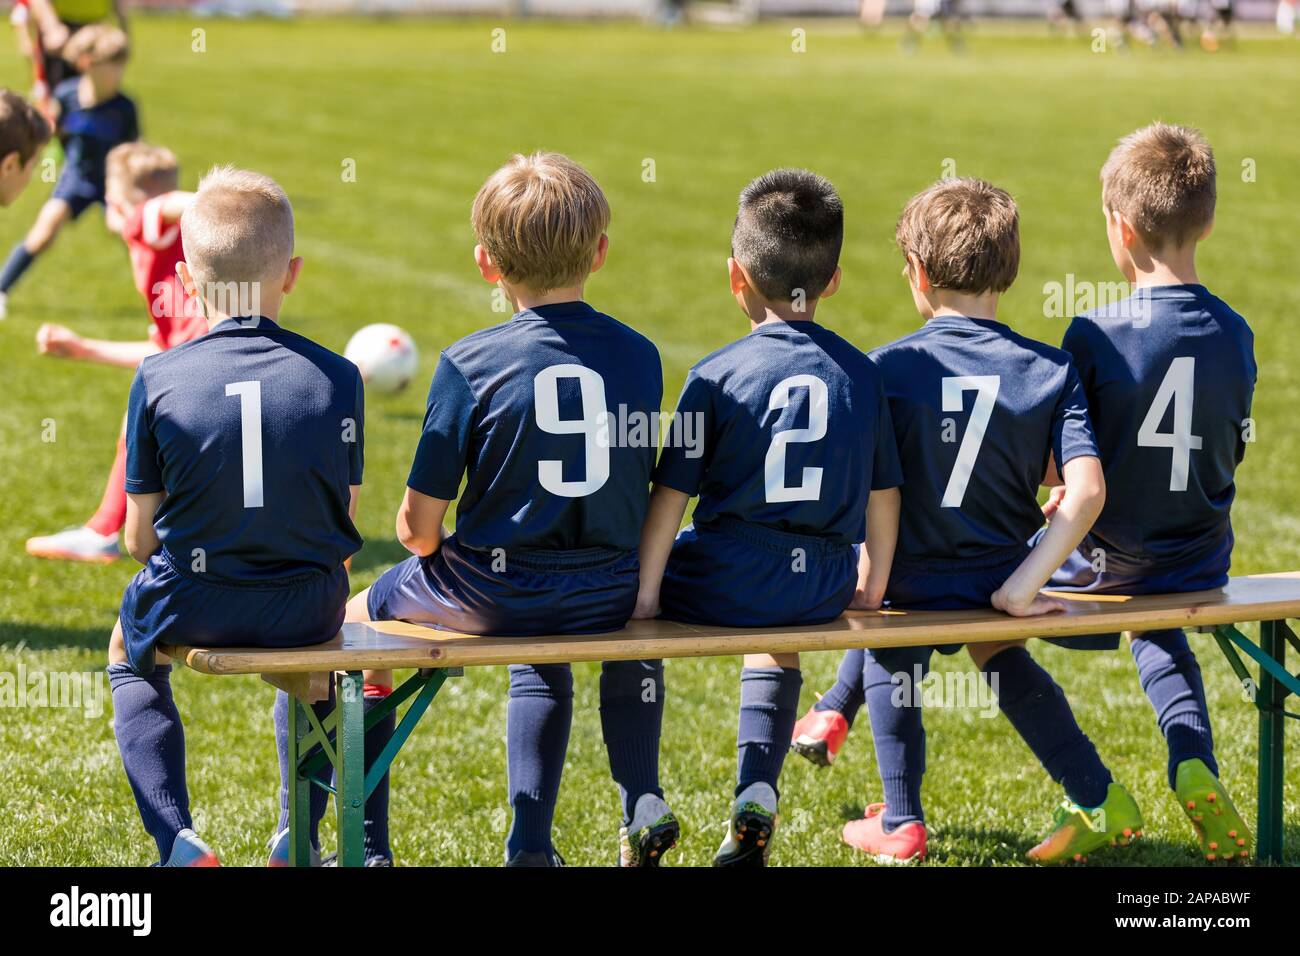 Friends on a Soccer Team Sitting on a Wooden Bench. Group of Interracial  Kids in a School Sports Team Stock Photo